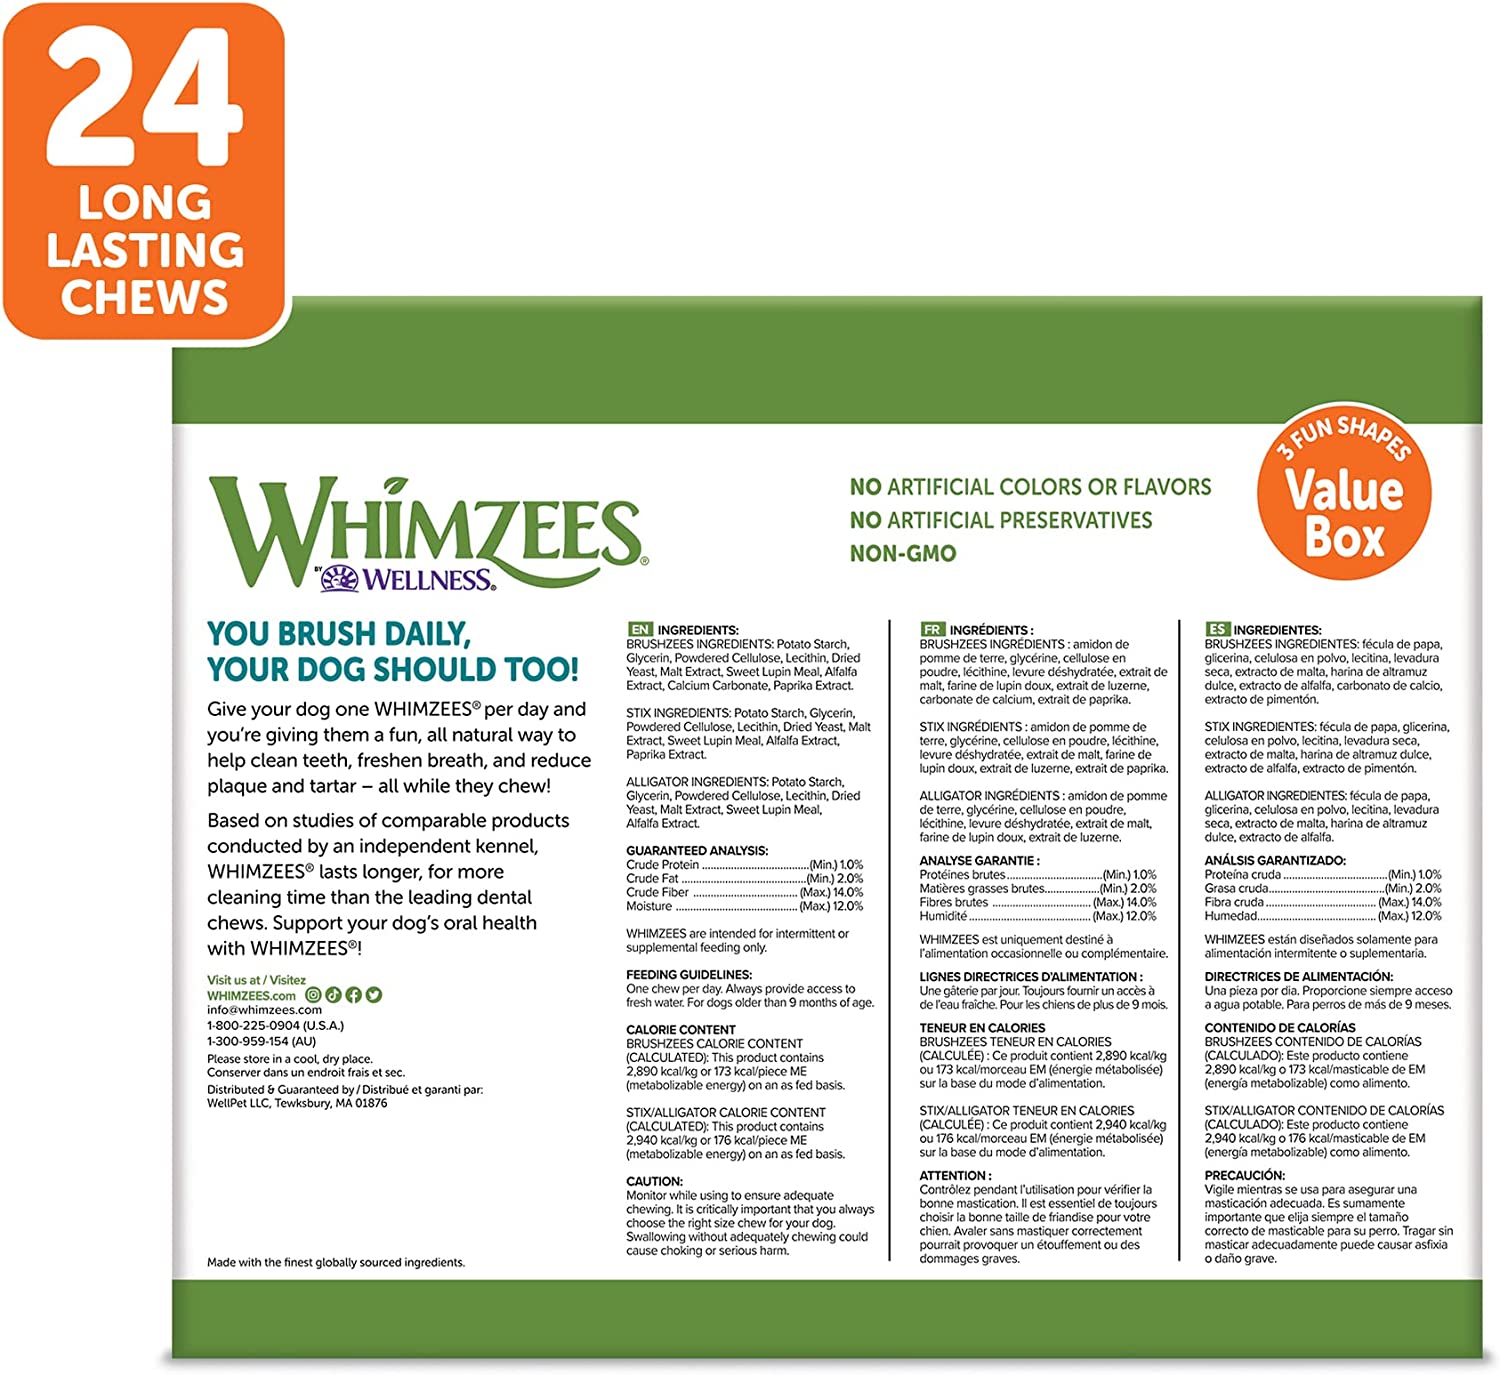 Whimzees Natural Grain-Free Dog Dental Chews, Daily Oral Care Treats, Long Lasting, Freshens Breath, Reduces Tartar & Plaque, for Large Dogs (40-60 lbs)